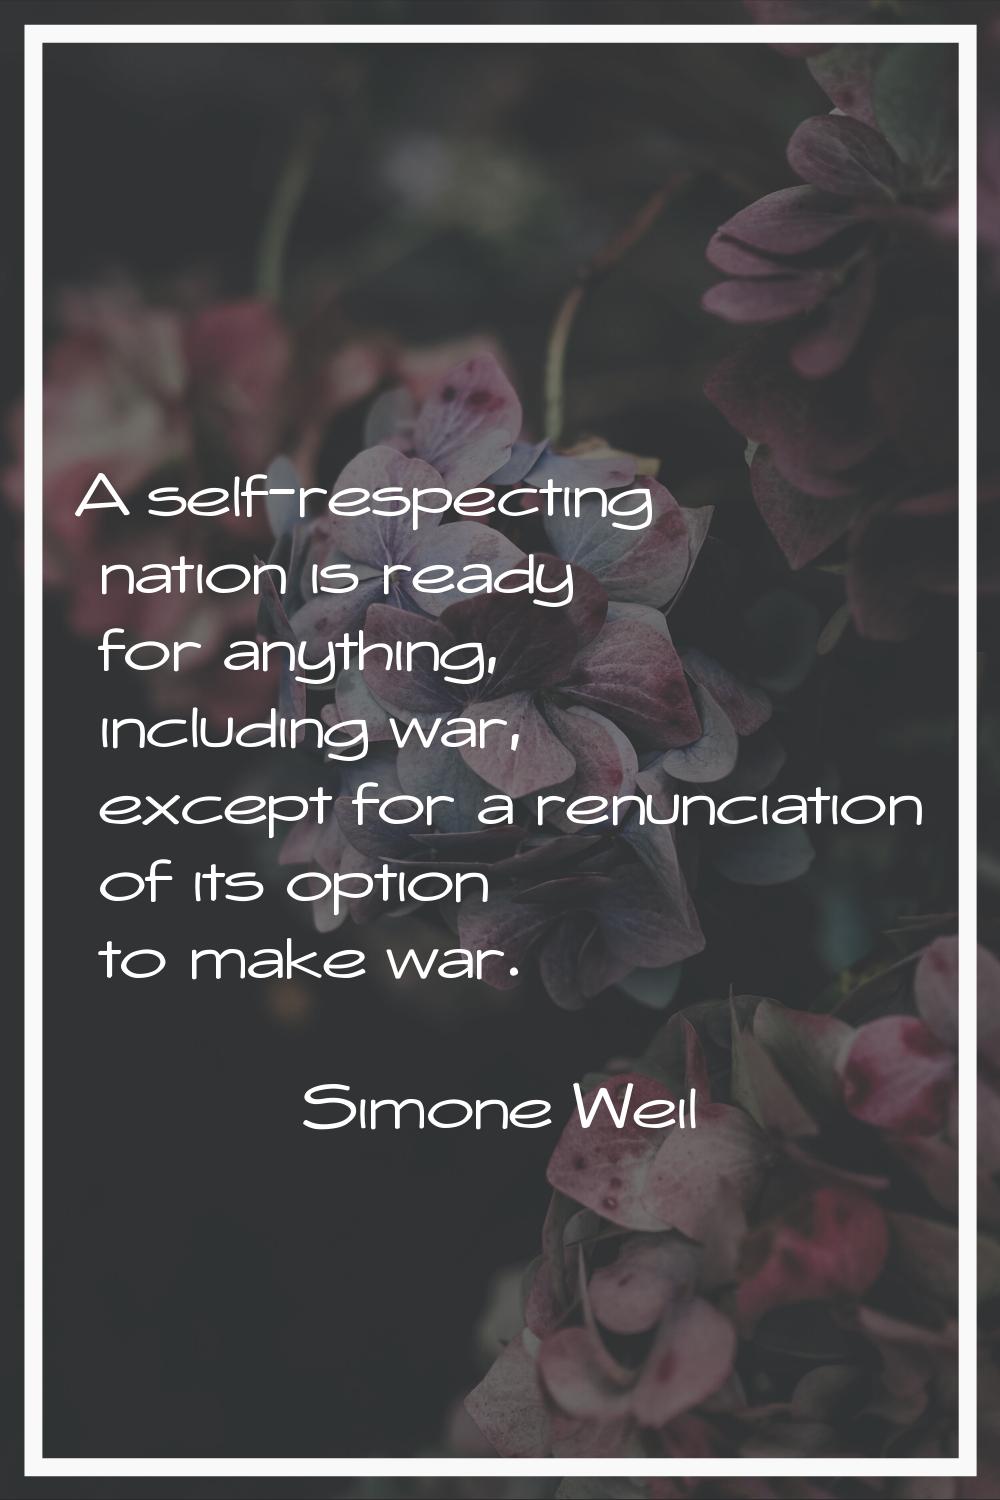 A self-respecting nation is ready for anything, including war, except for a renunciation of its opt